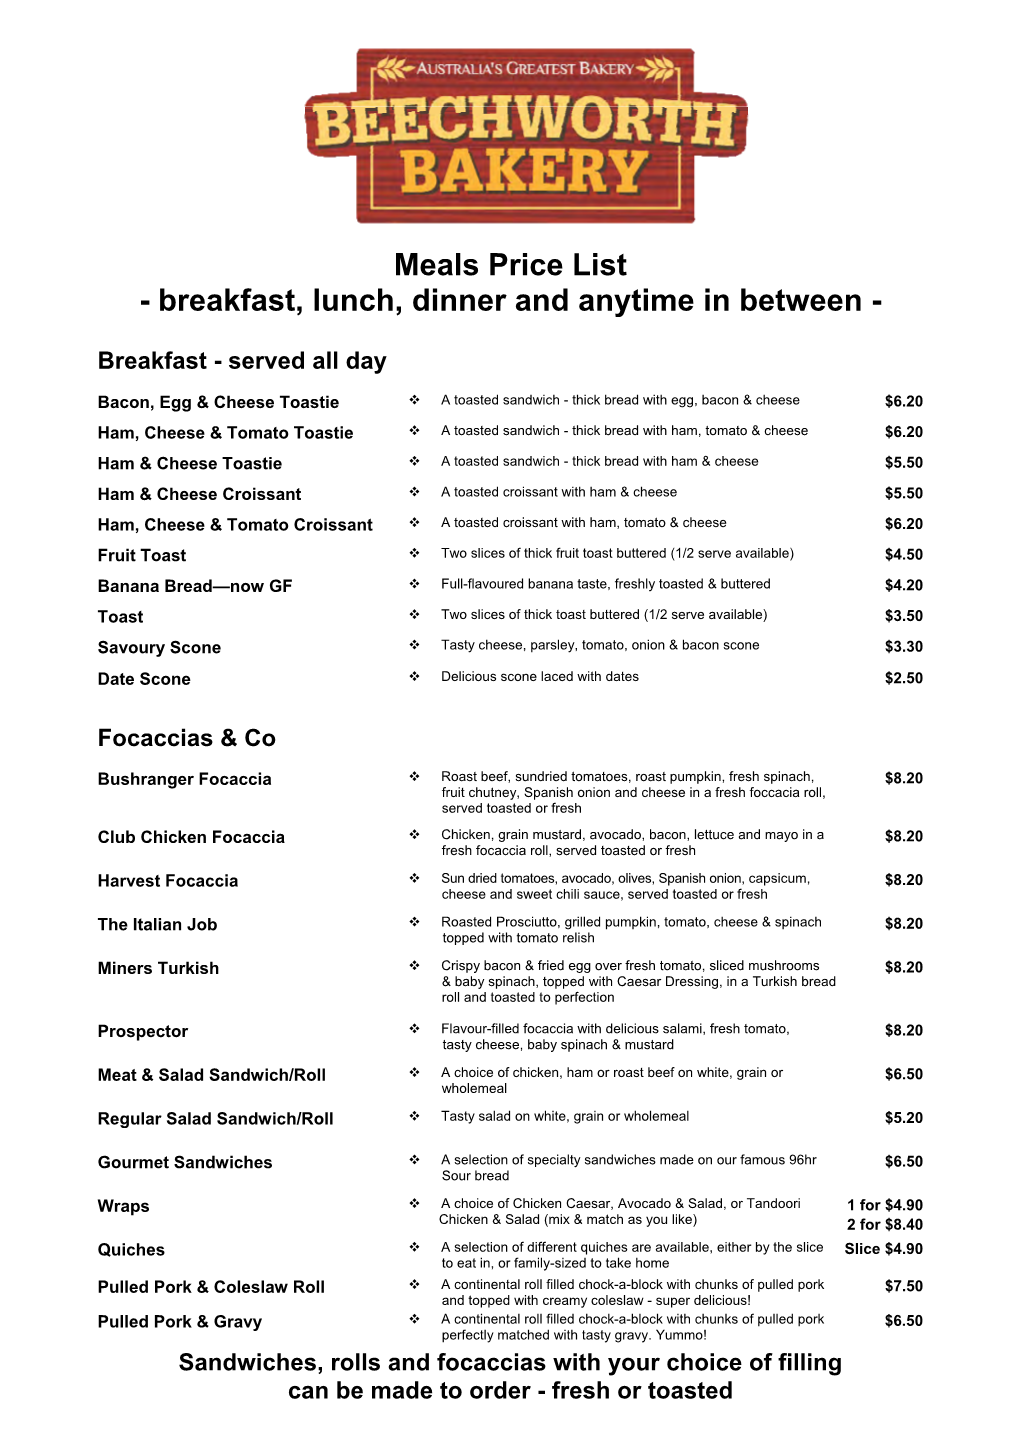 Meals Price List - Breakfast, Lunch, Dinner and Anytime in Between